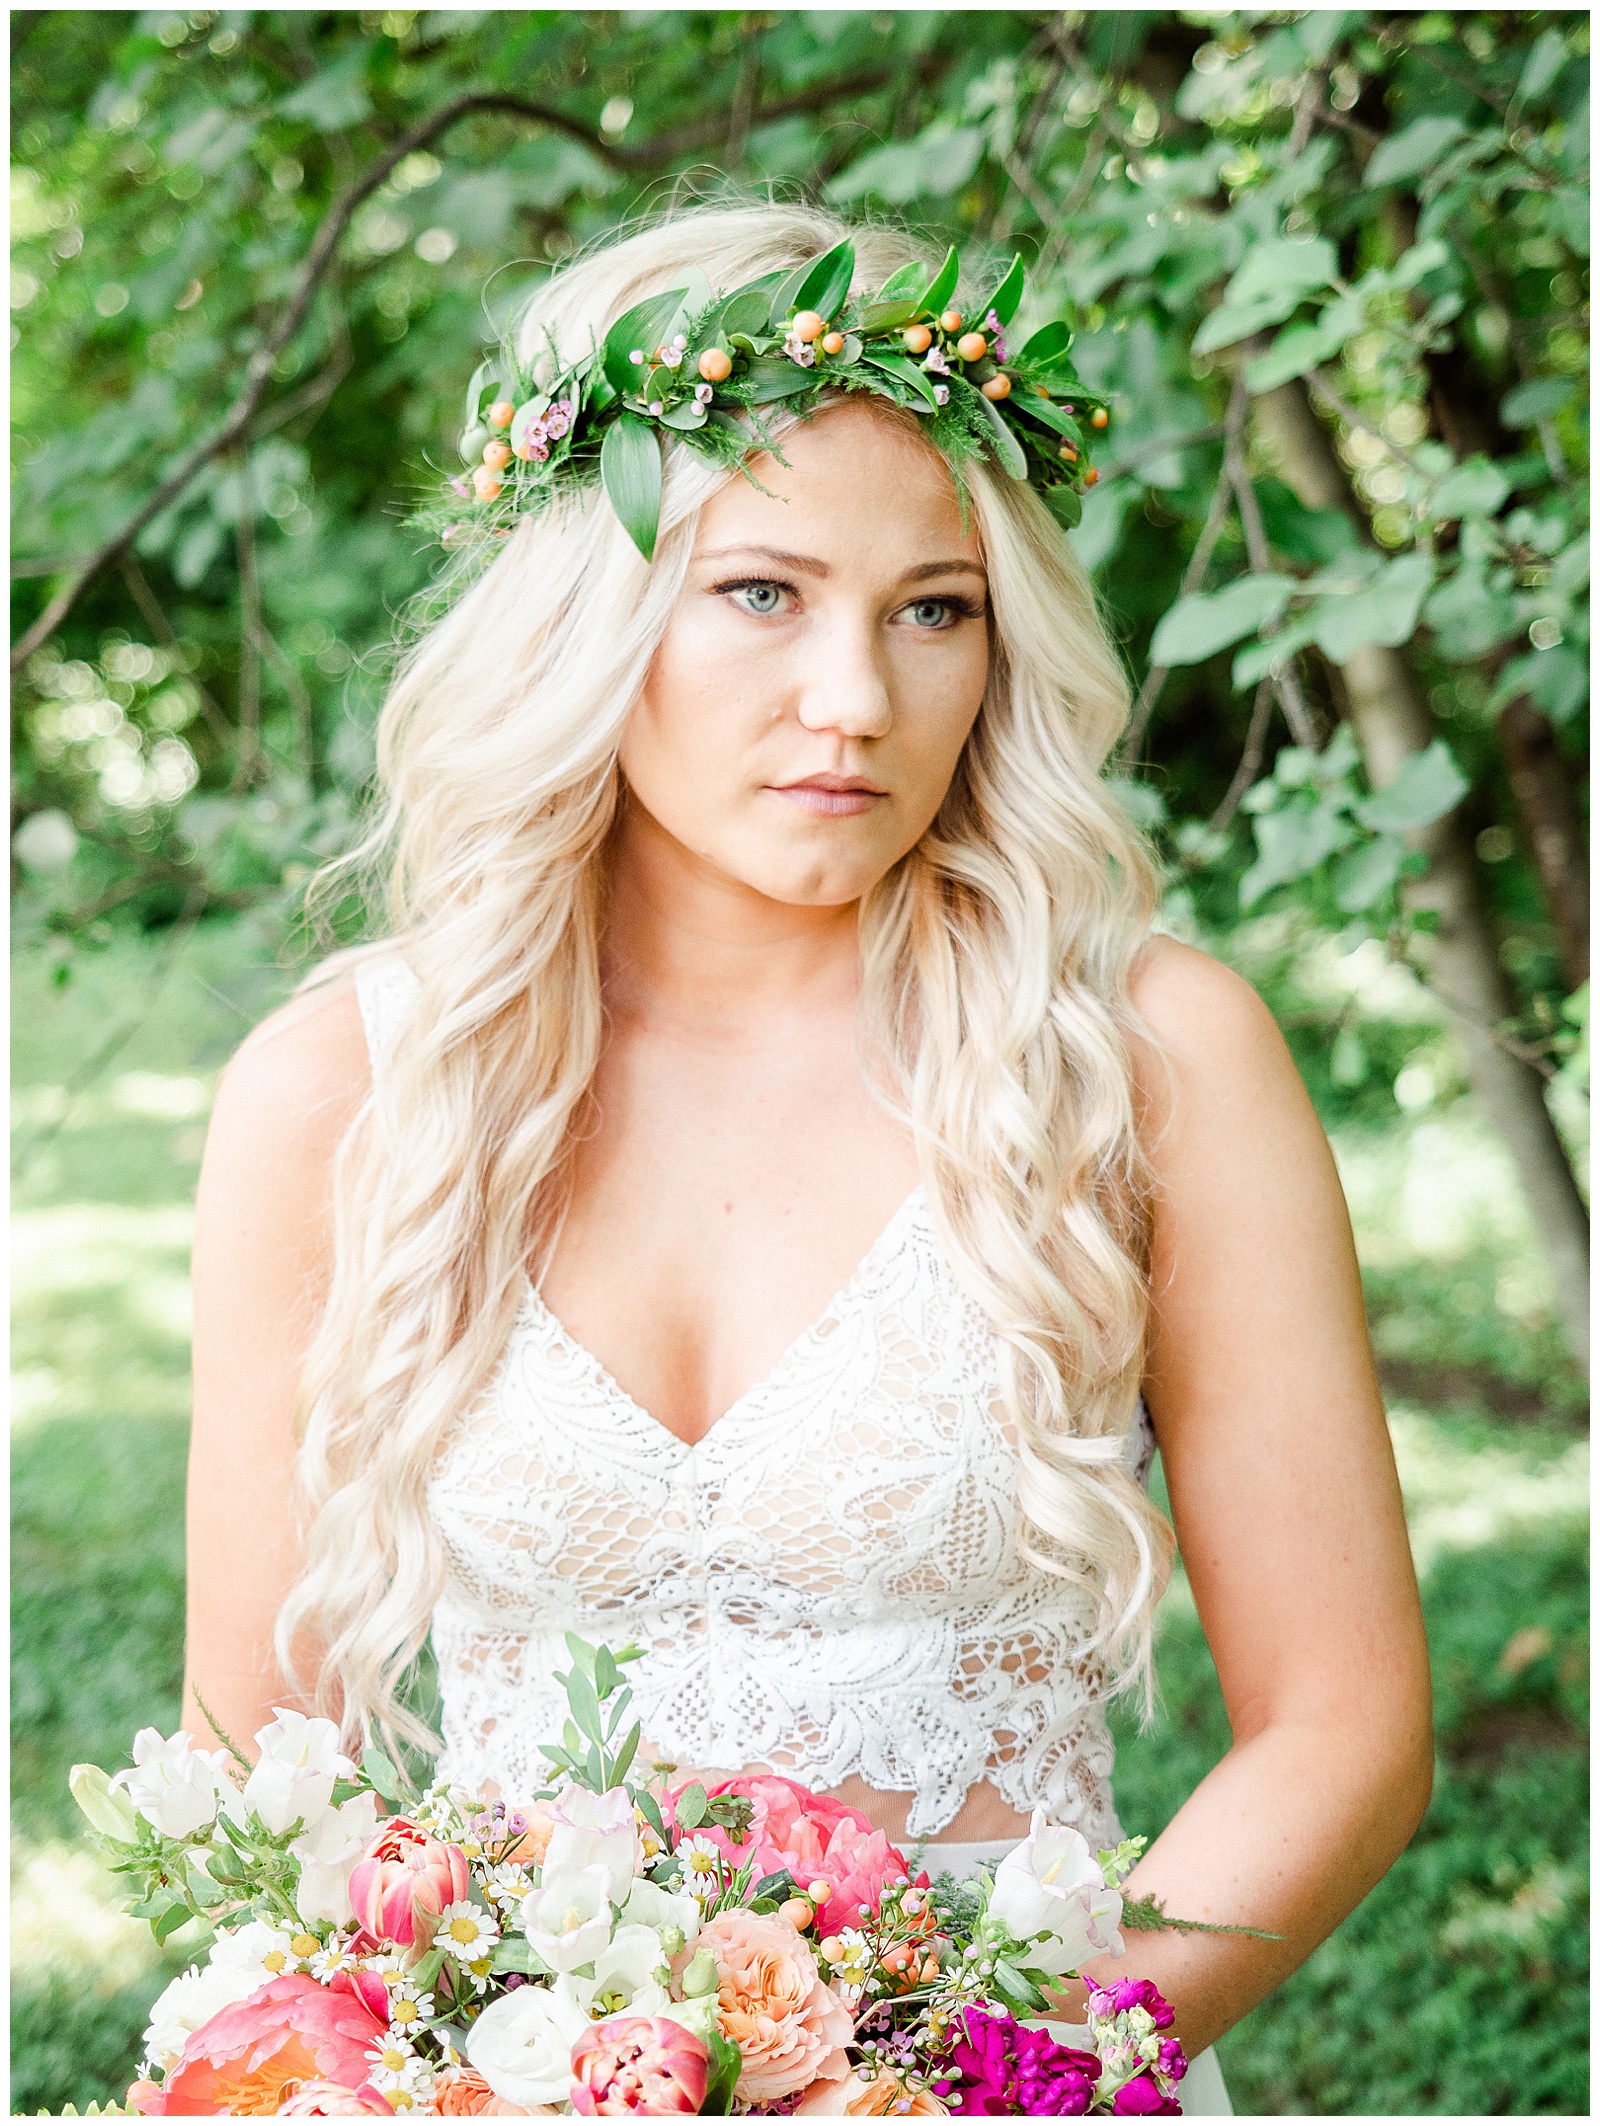 Woodland Fairytale Bride ✨ Enchanting Bohemian Flower Crown and Bright Boho Chic Theme in Charlotte, North Carolina | check out the full wedding at KevynDixonPhoto.com